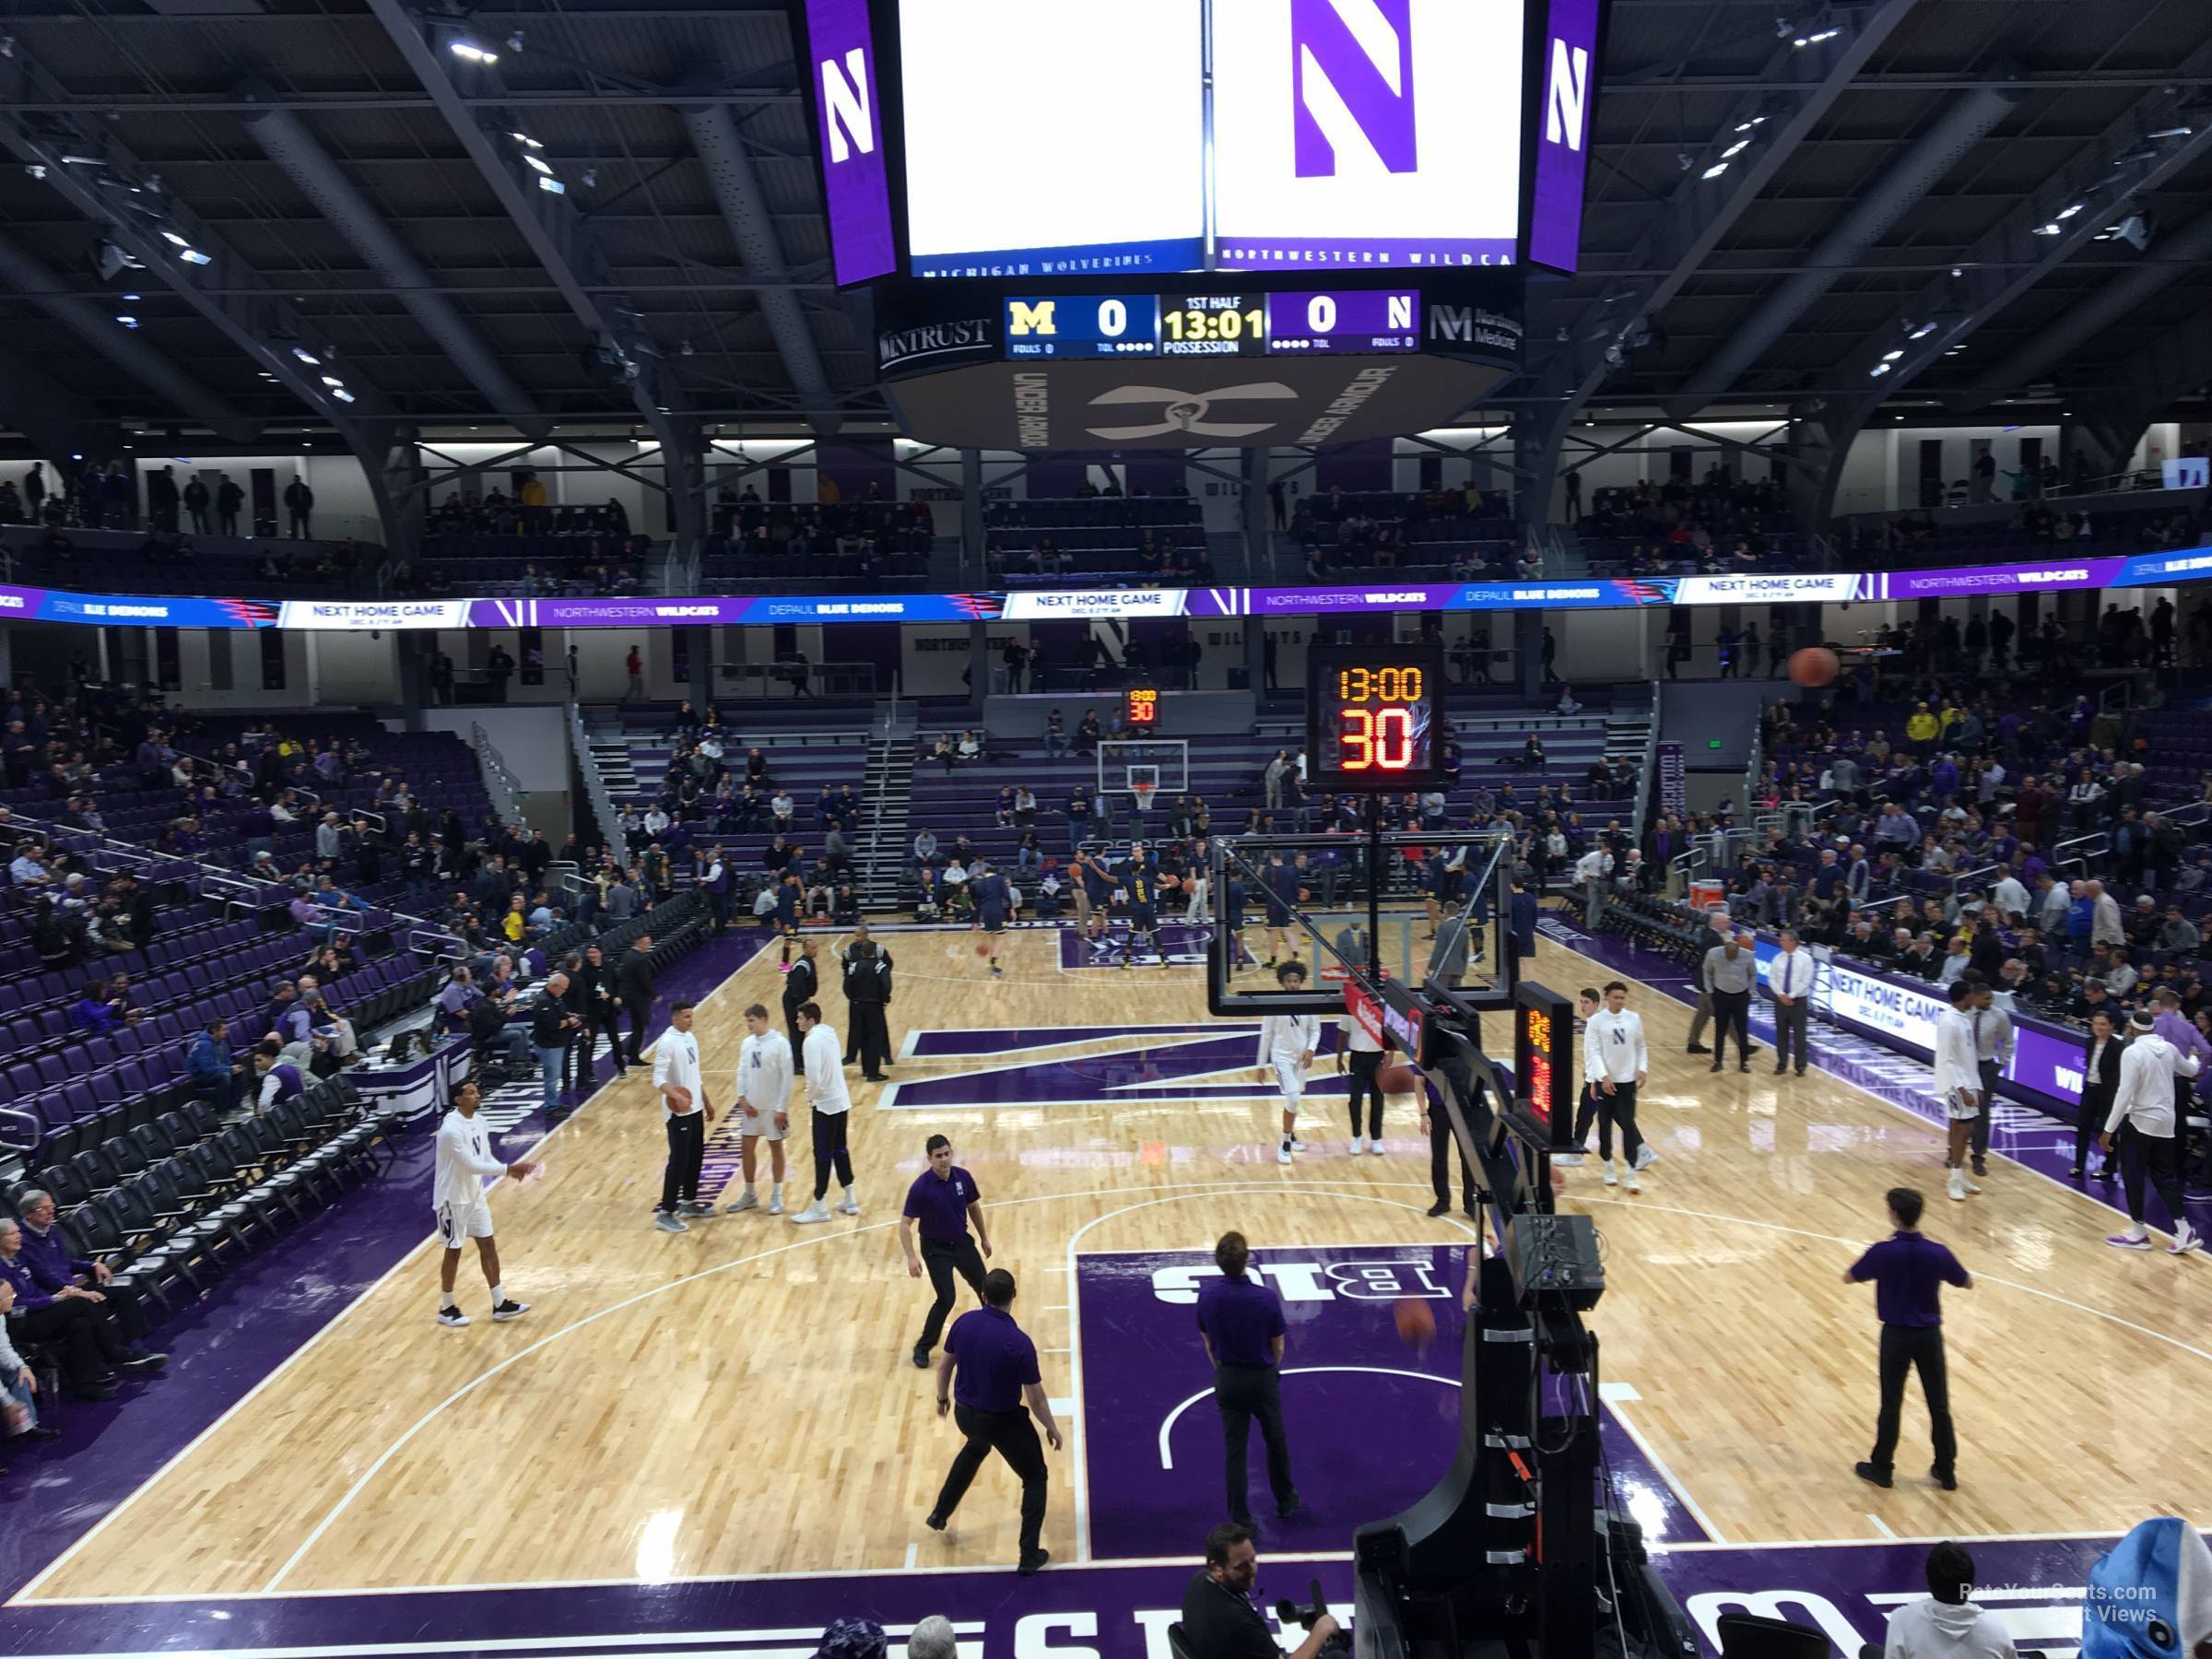 section 112, row 12 seat view  - welsh-ryan arena